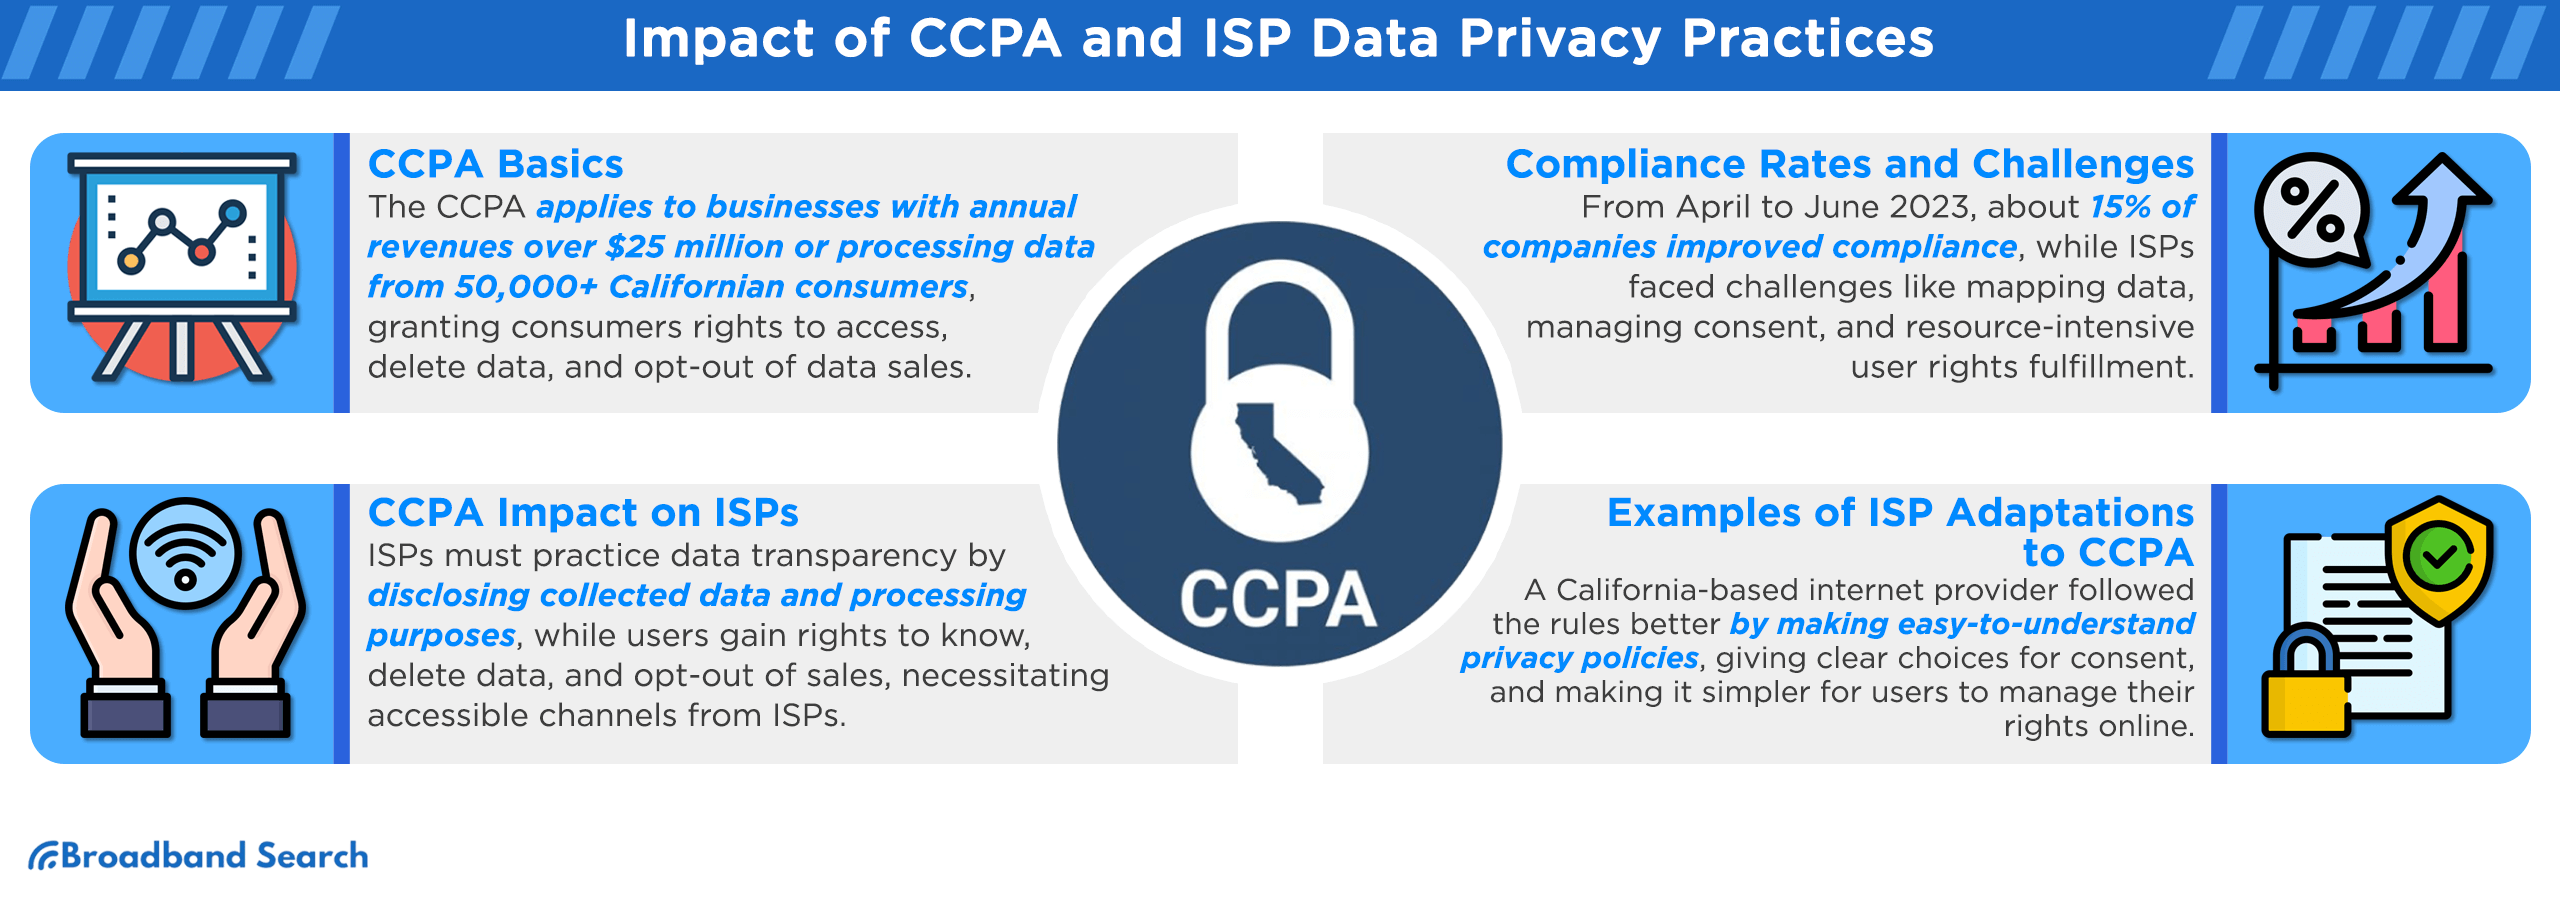 impact of CCPA and ISP data privacy practices